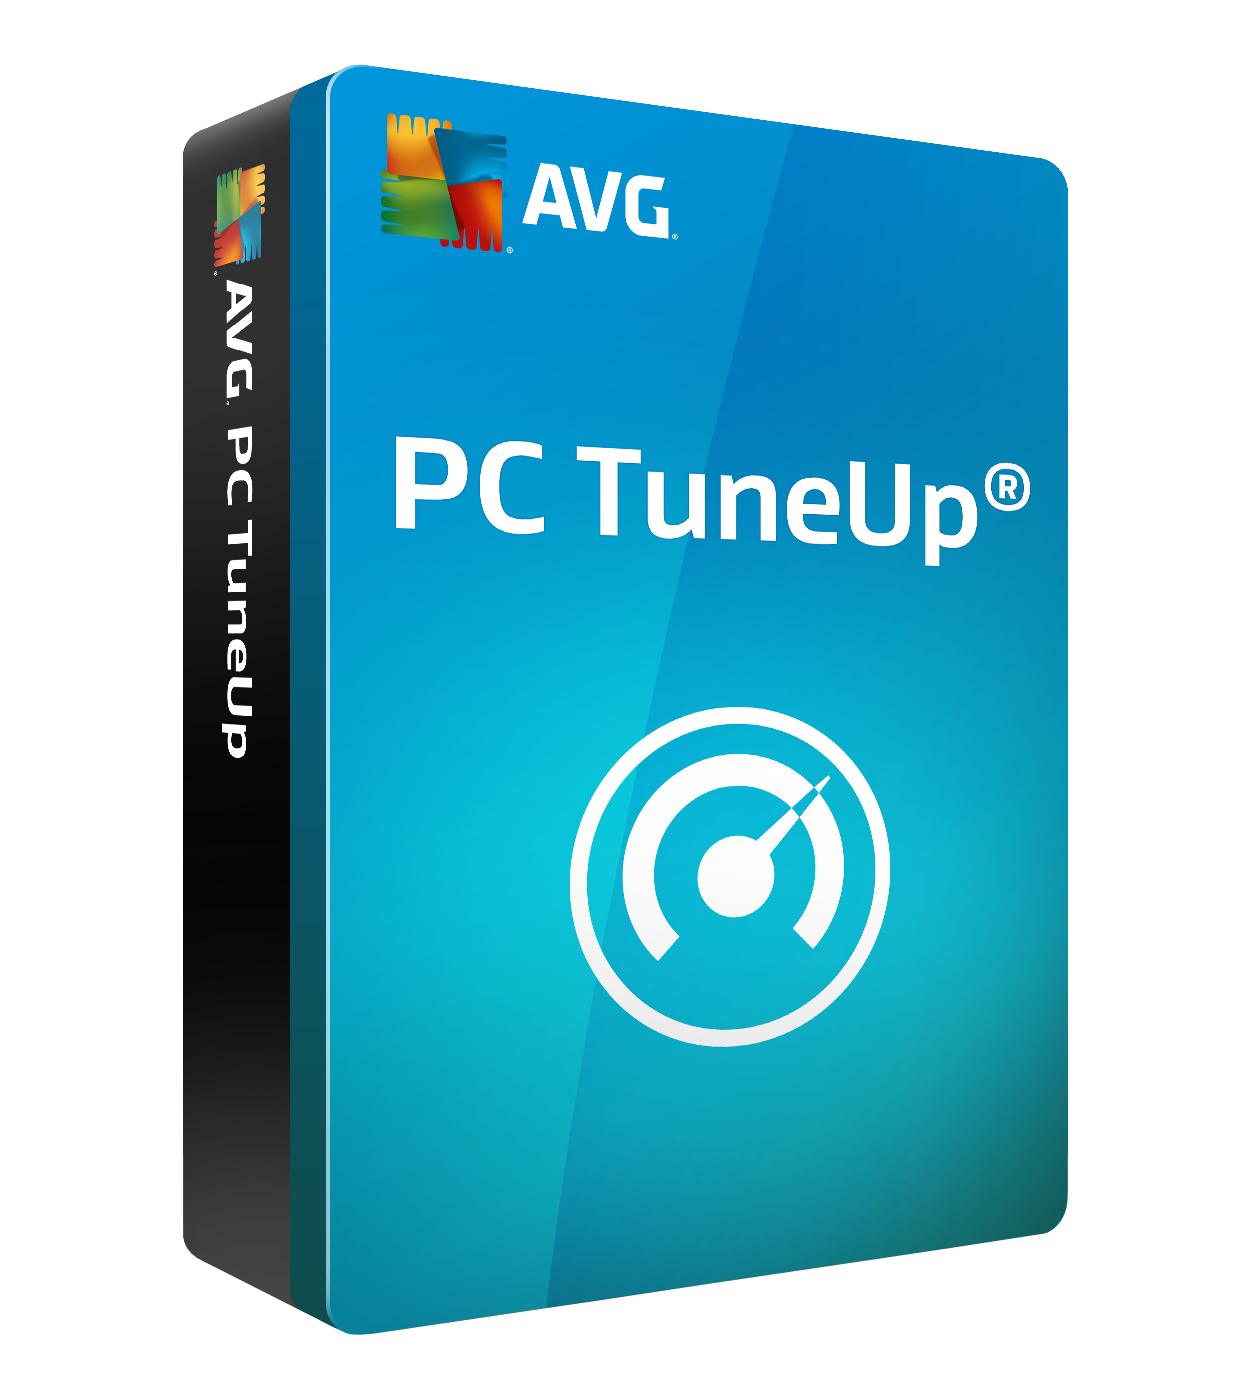 AVG PC TuneUp 10 Devices 1 Year